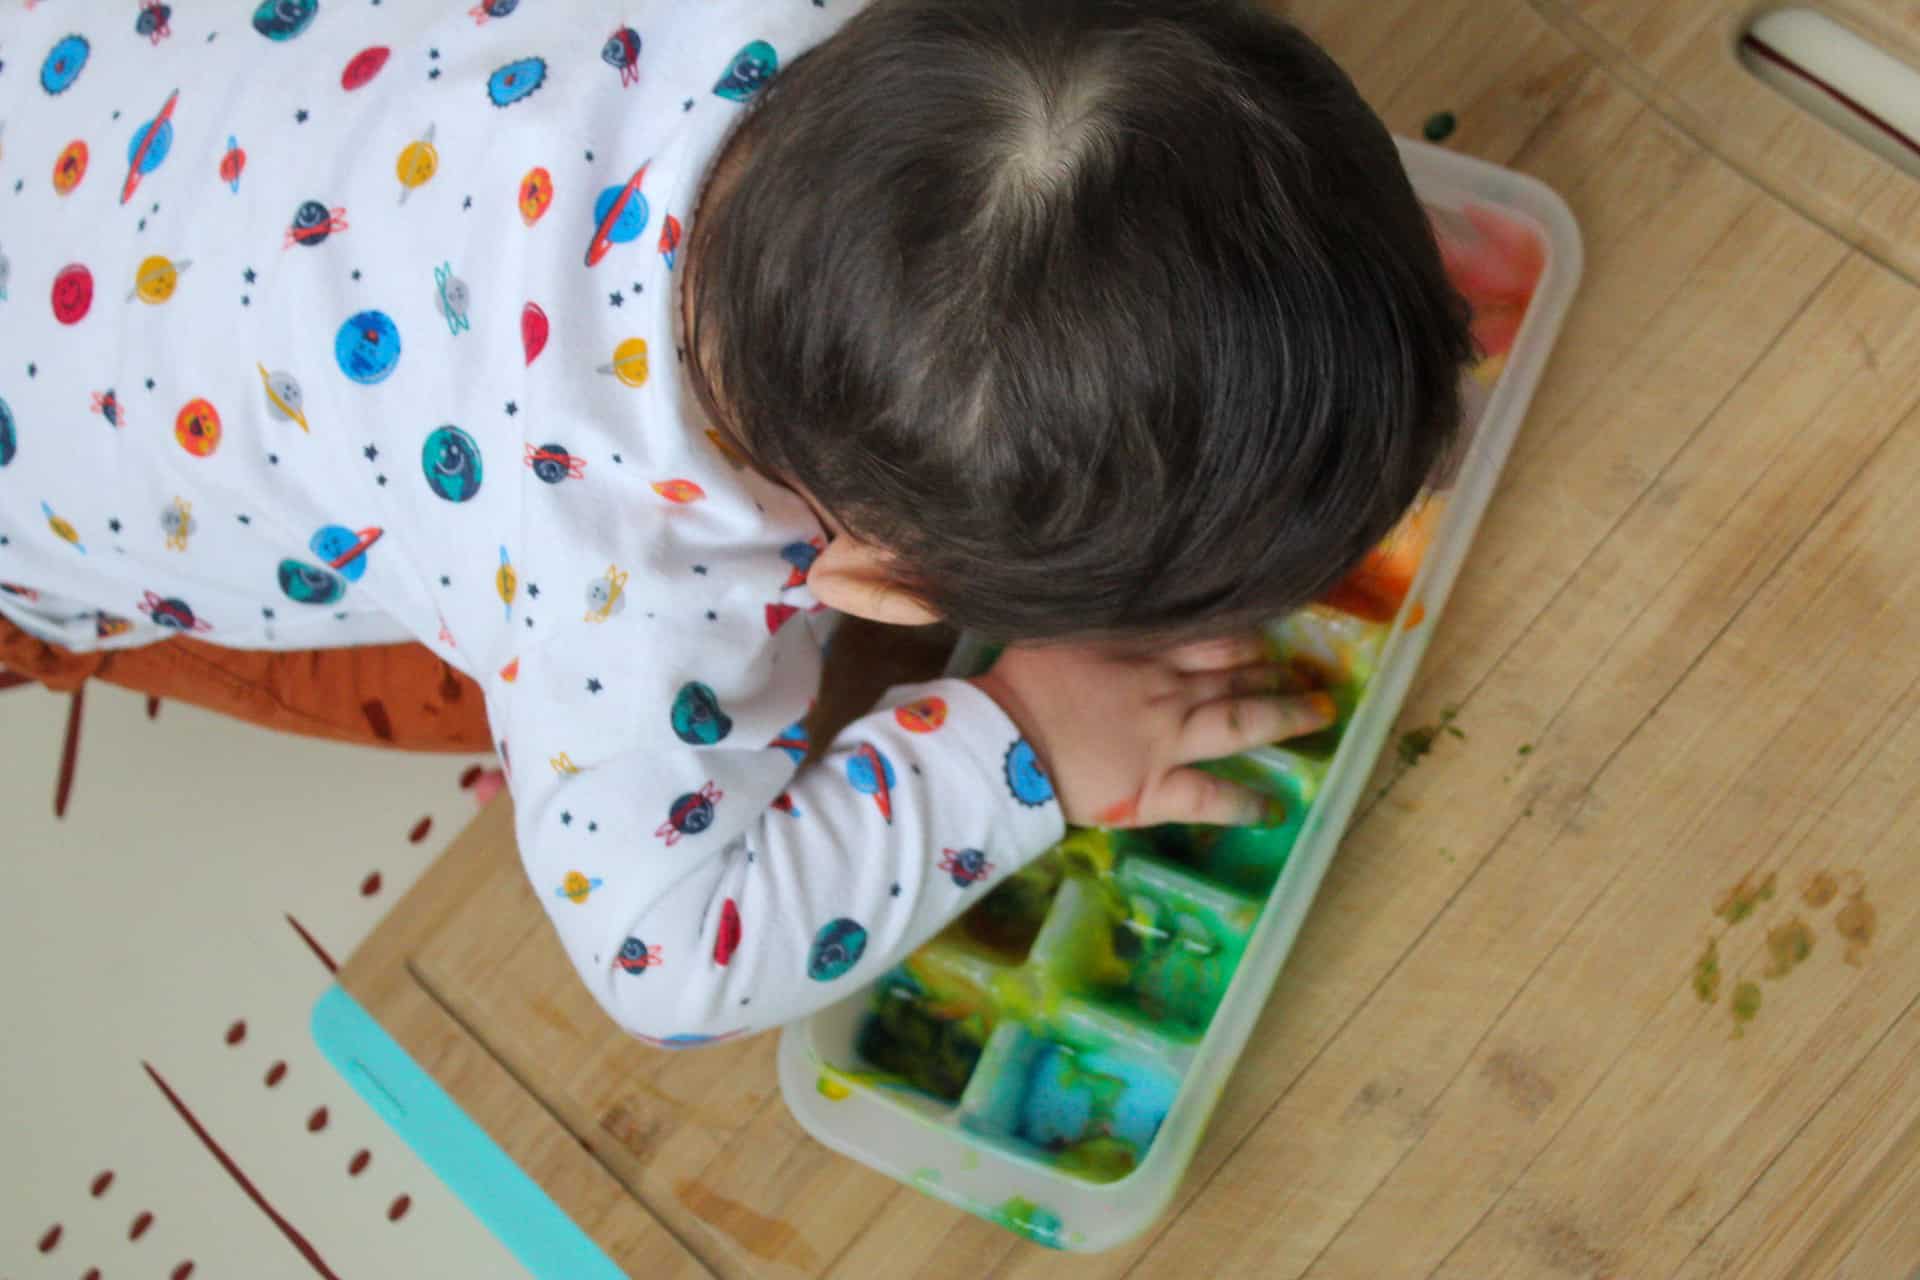 5 Baby Games You Can Play with Your Fingers